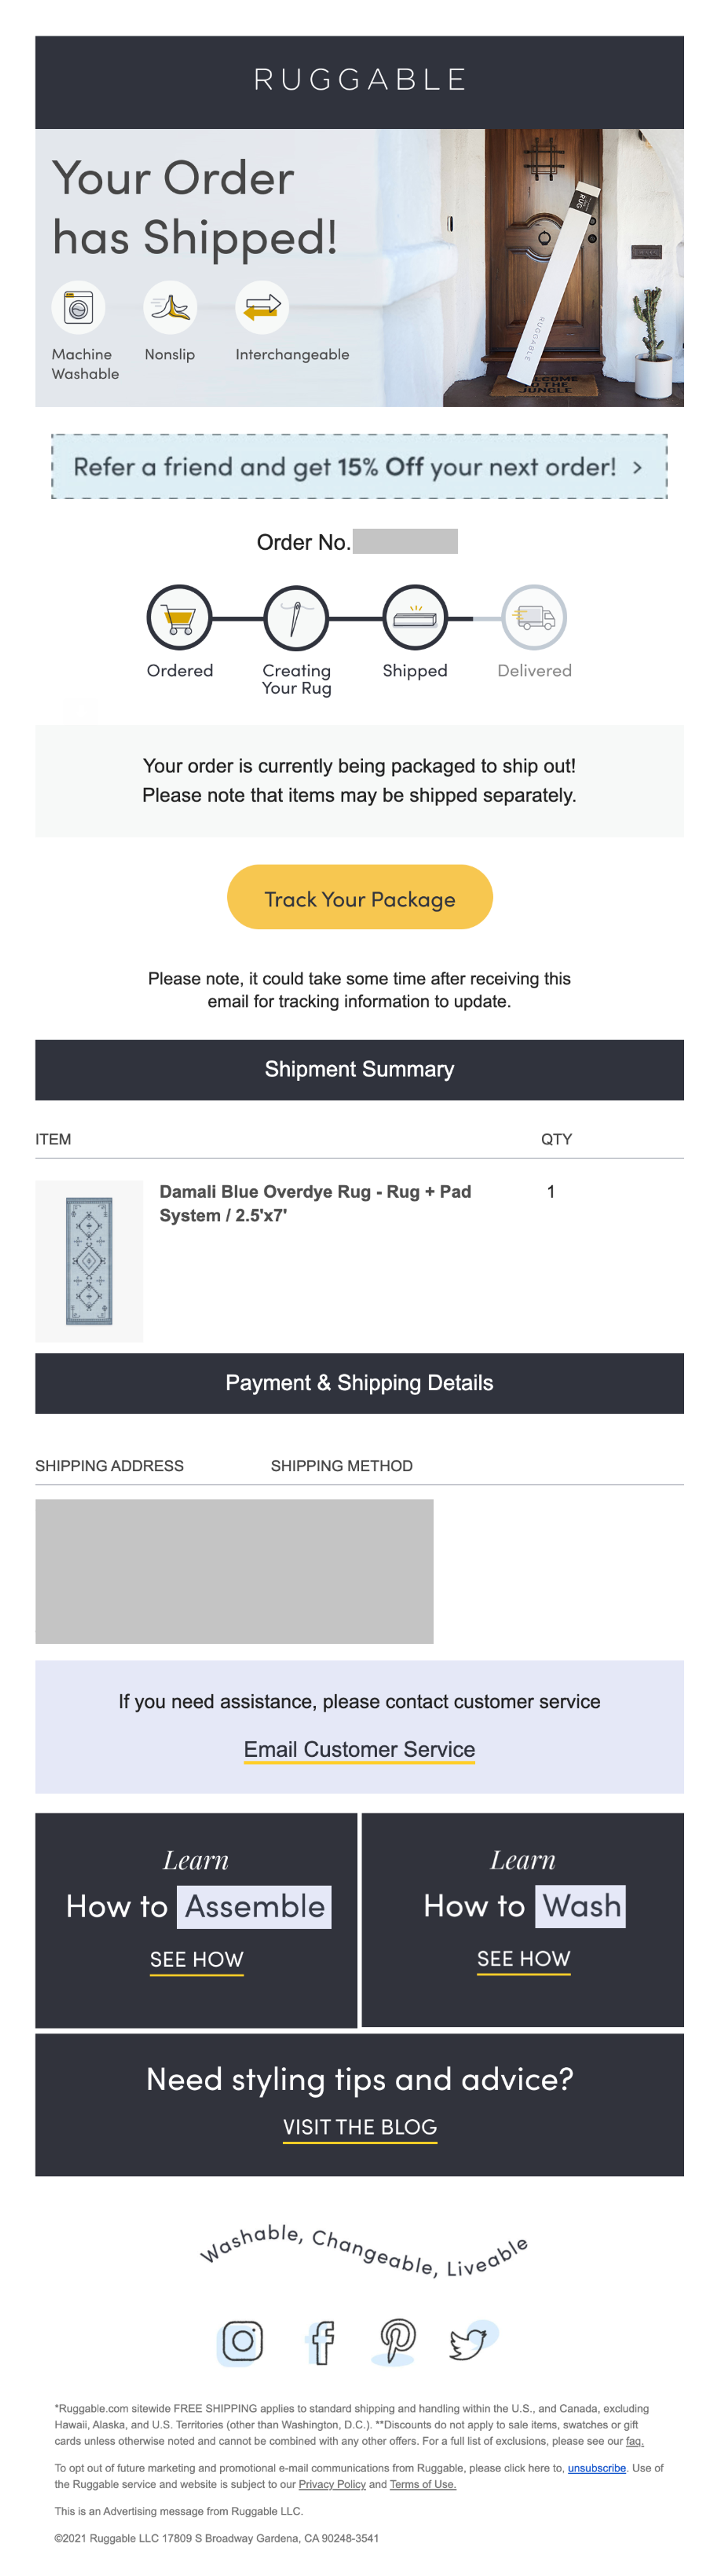 Ruggable Shipment Confirmation Email Template